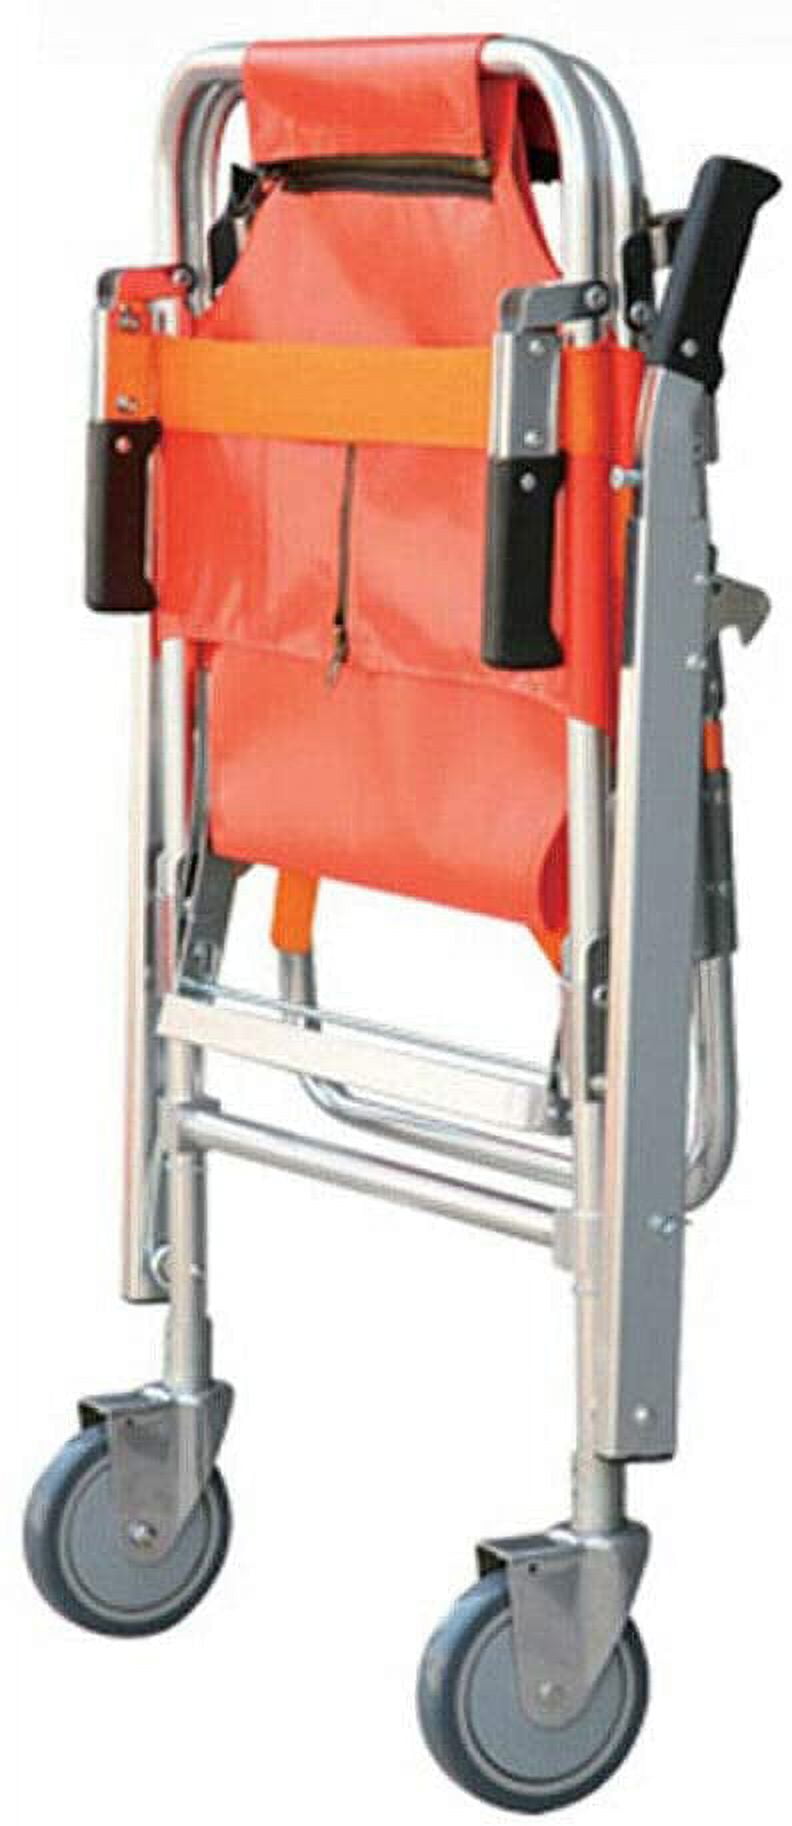 Hyperlite Evacuation Foldable Medical Stair Lift Chair Portable EMS, EMTs, Ambulance, and Emergency Transport Stair Chair, Men's, Size: 35.4” Large x